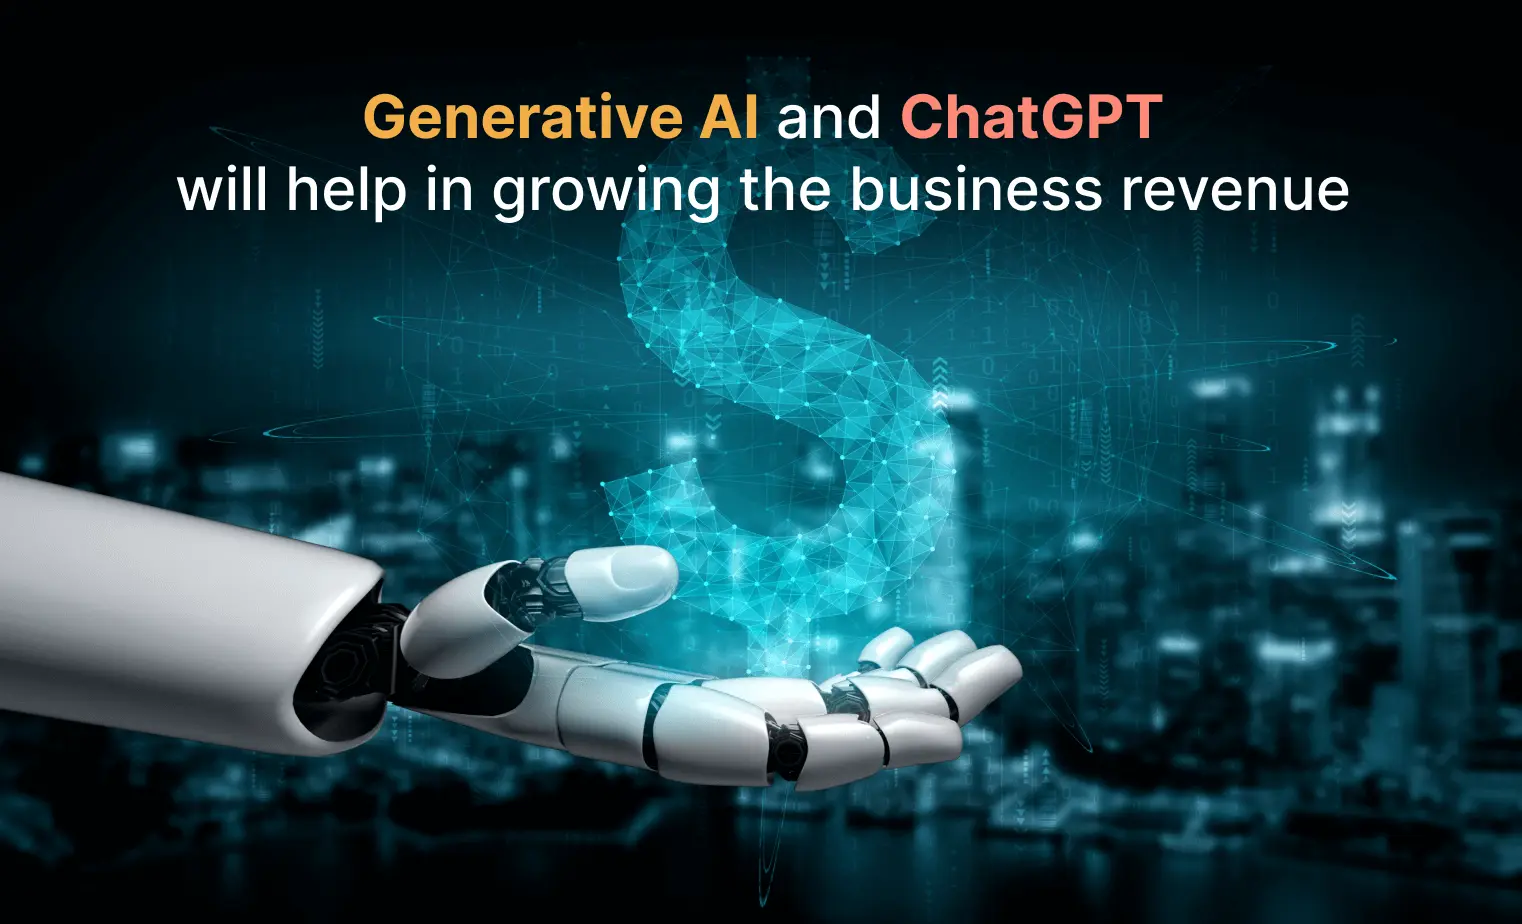 How Generative AI and ChatGPT help businesses grow revenue